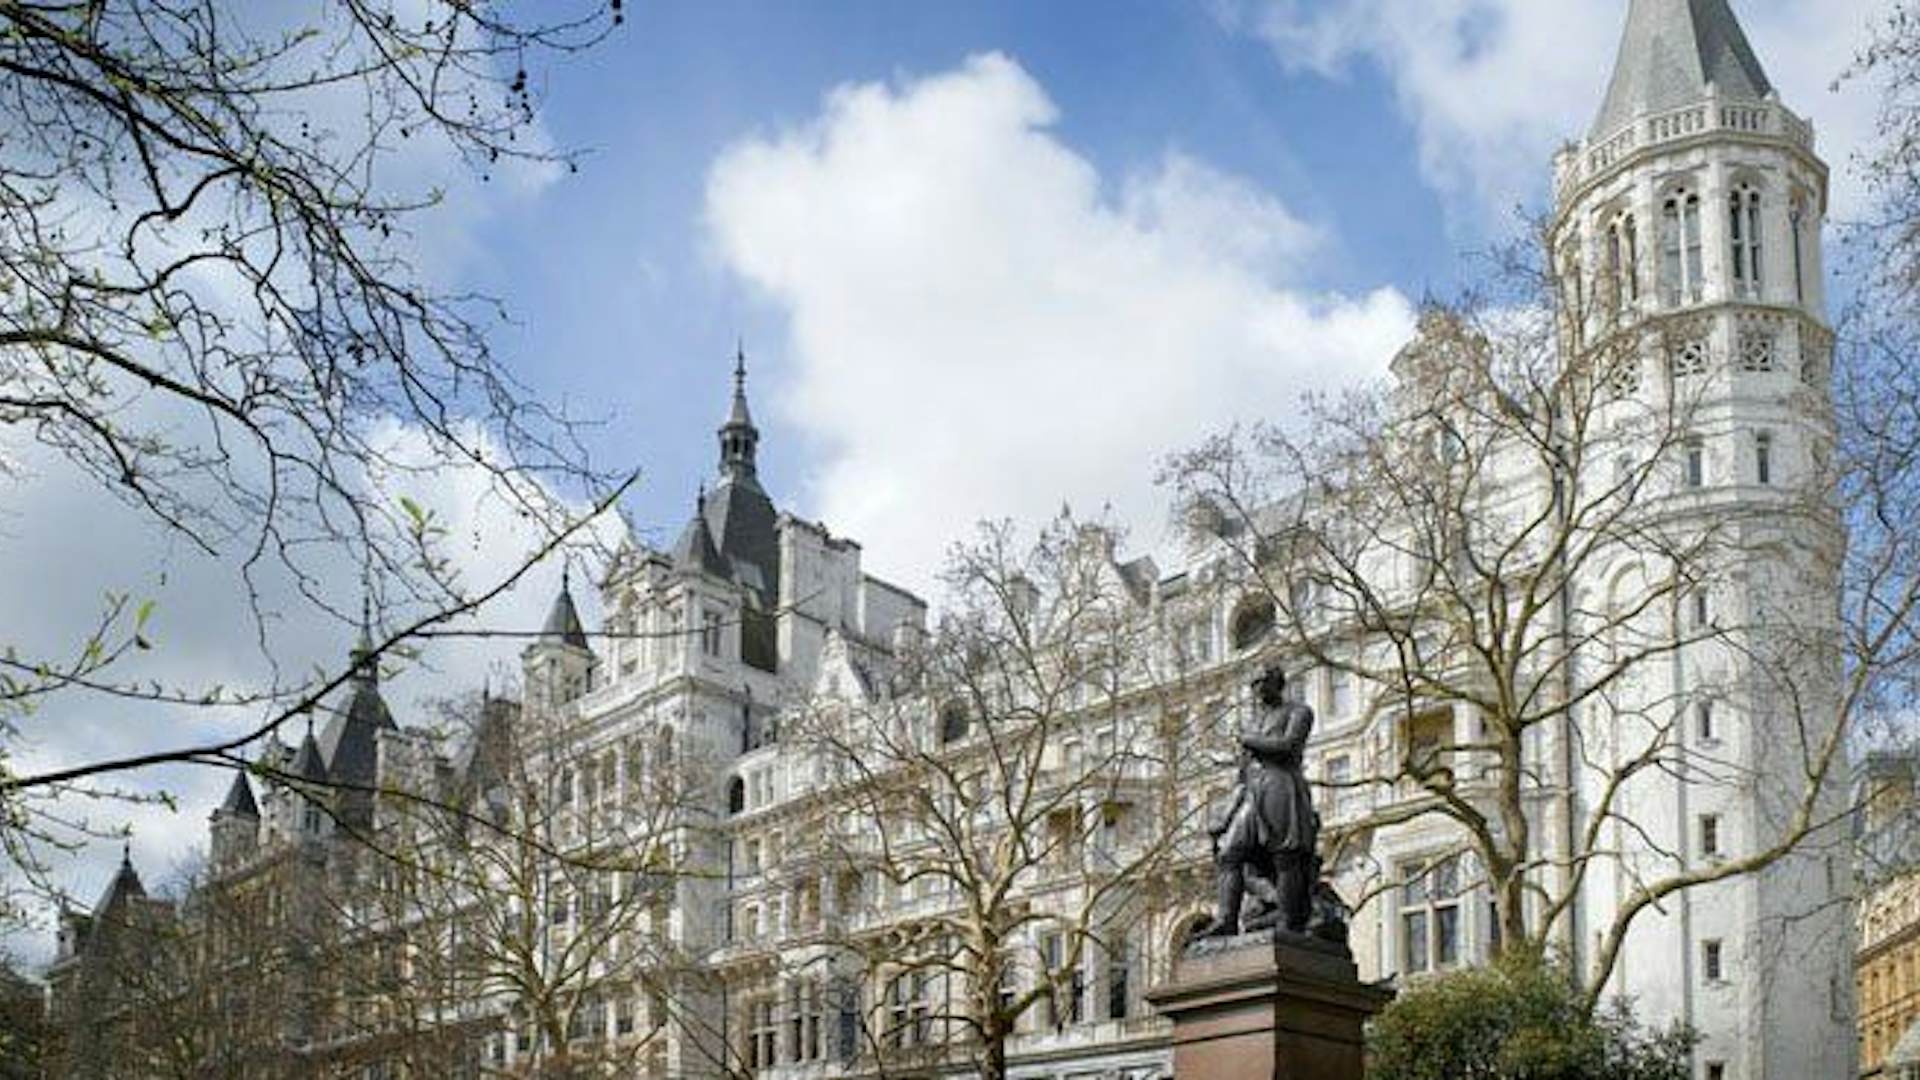 The Royal Horseguard's Hotel and One Whitehall Place